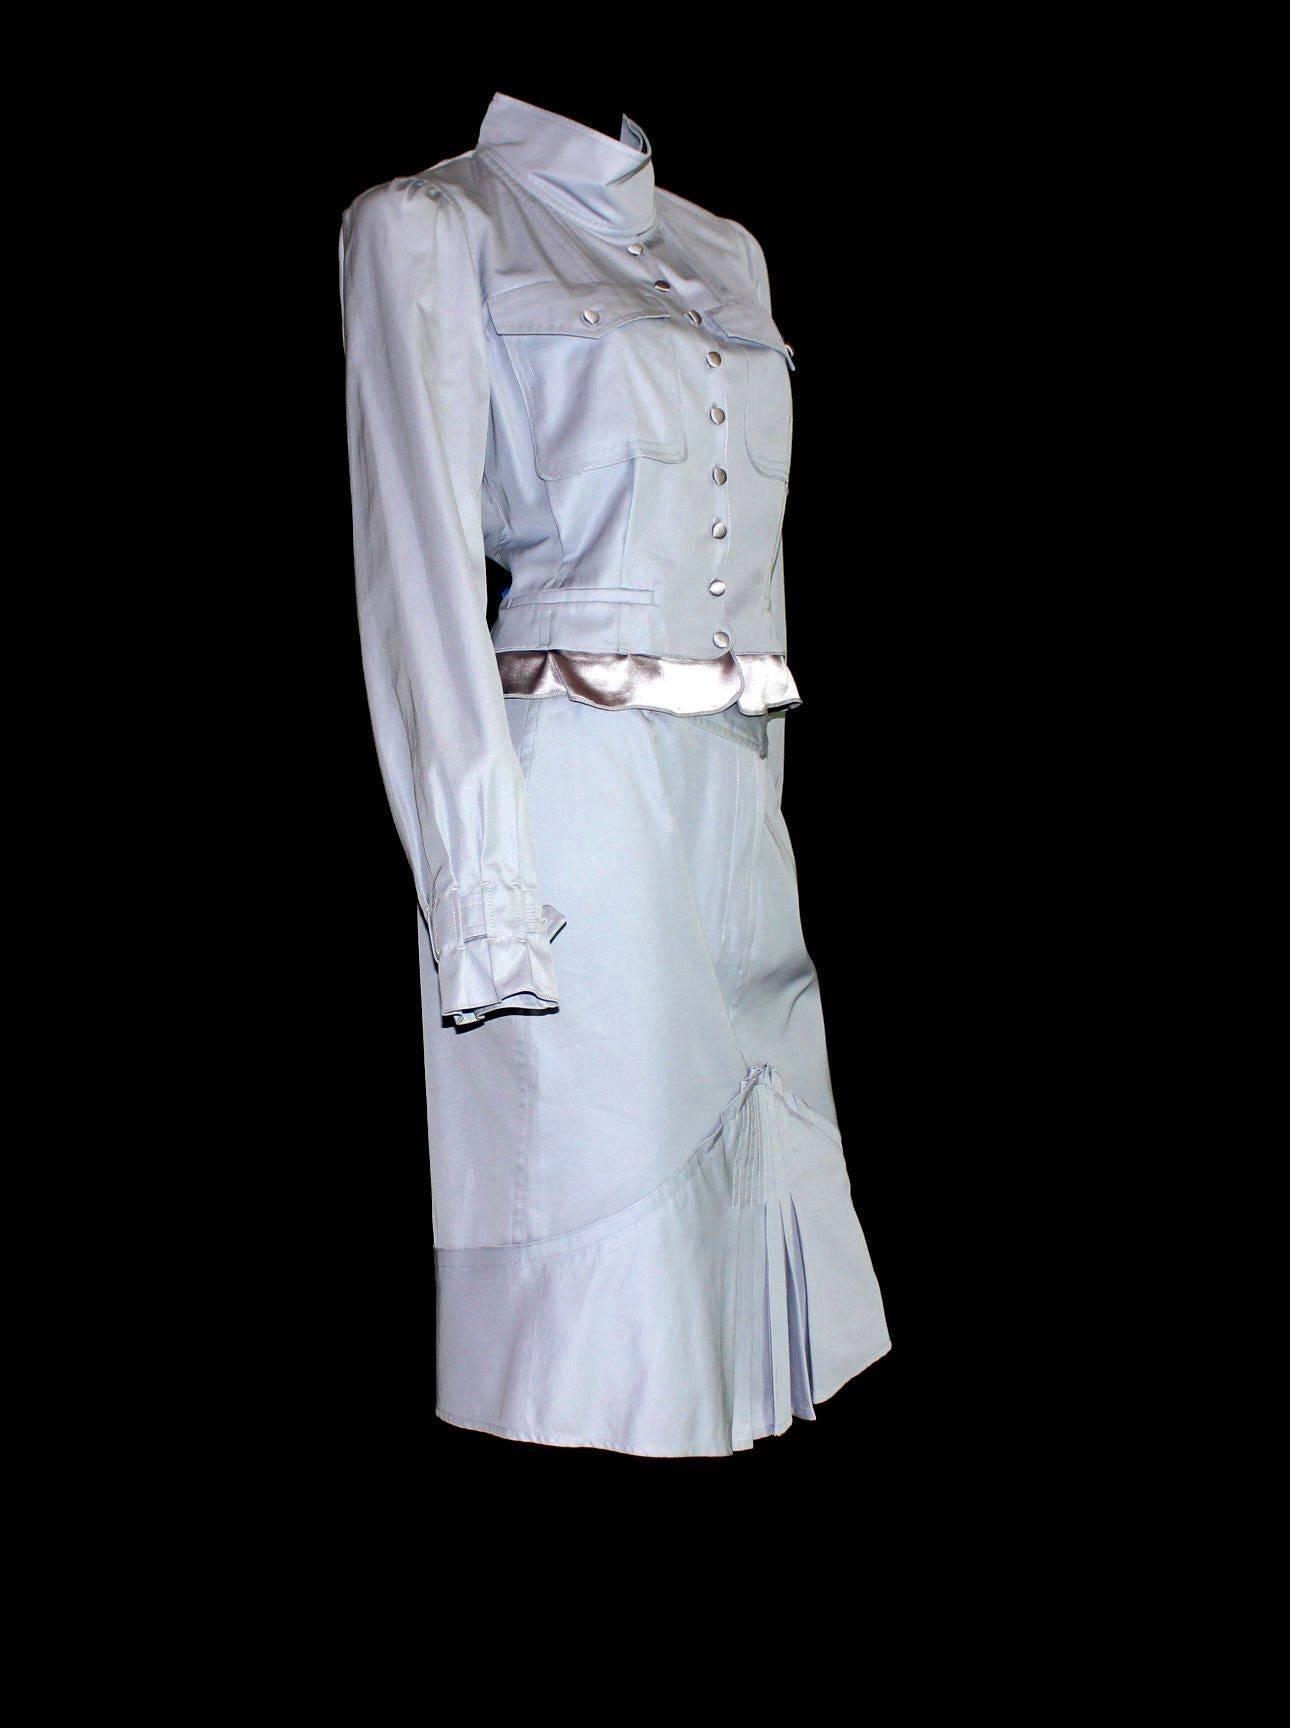 Stunning Yves Saint Laurent Skirt Suit
Designed by Tom Ford for his collection for YSL 
Spring / Summer 2003
Pleated Skirt
Beautiful satin silk buttons and trimming
Partially lined
Made in France
Size 38
Retailed at 5499$
Dry Clean Only
